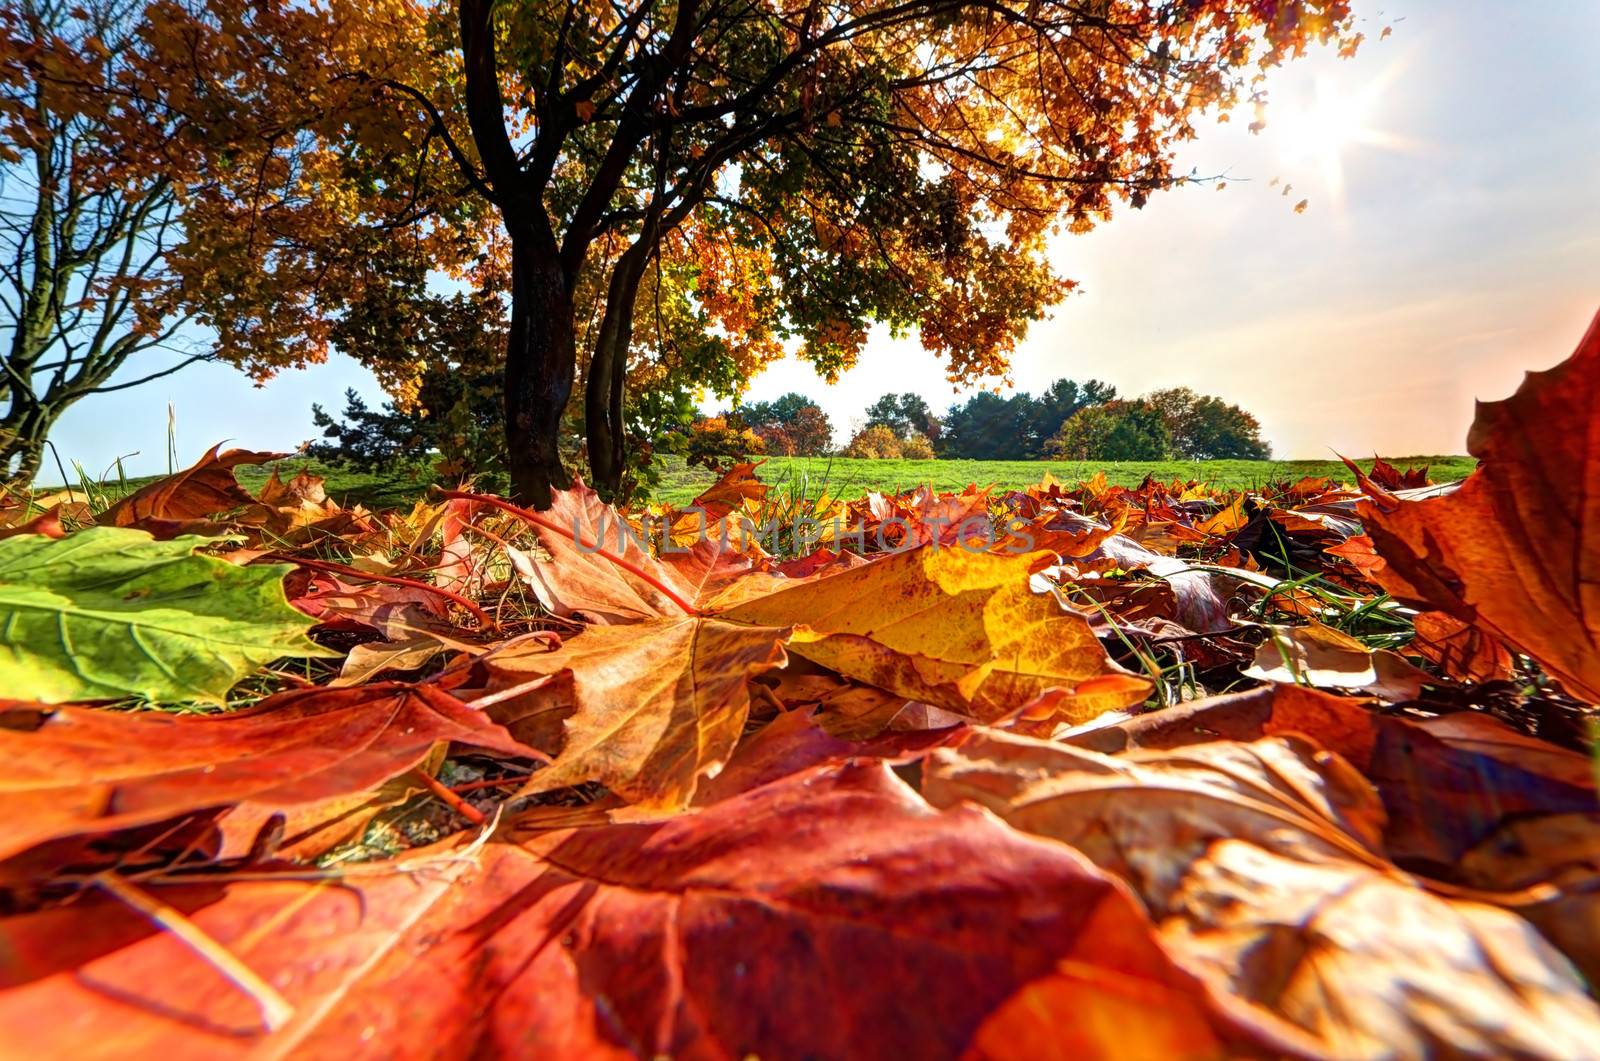 Autumn, fall landscape in park. Colorful leaves, sunny blue sky.